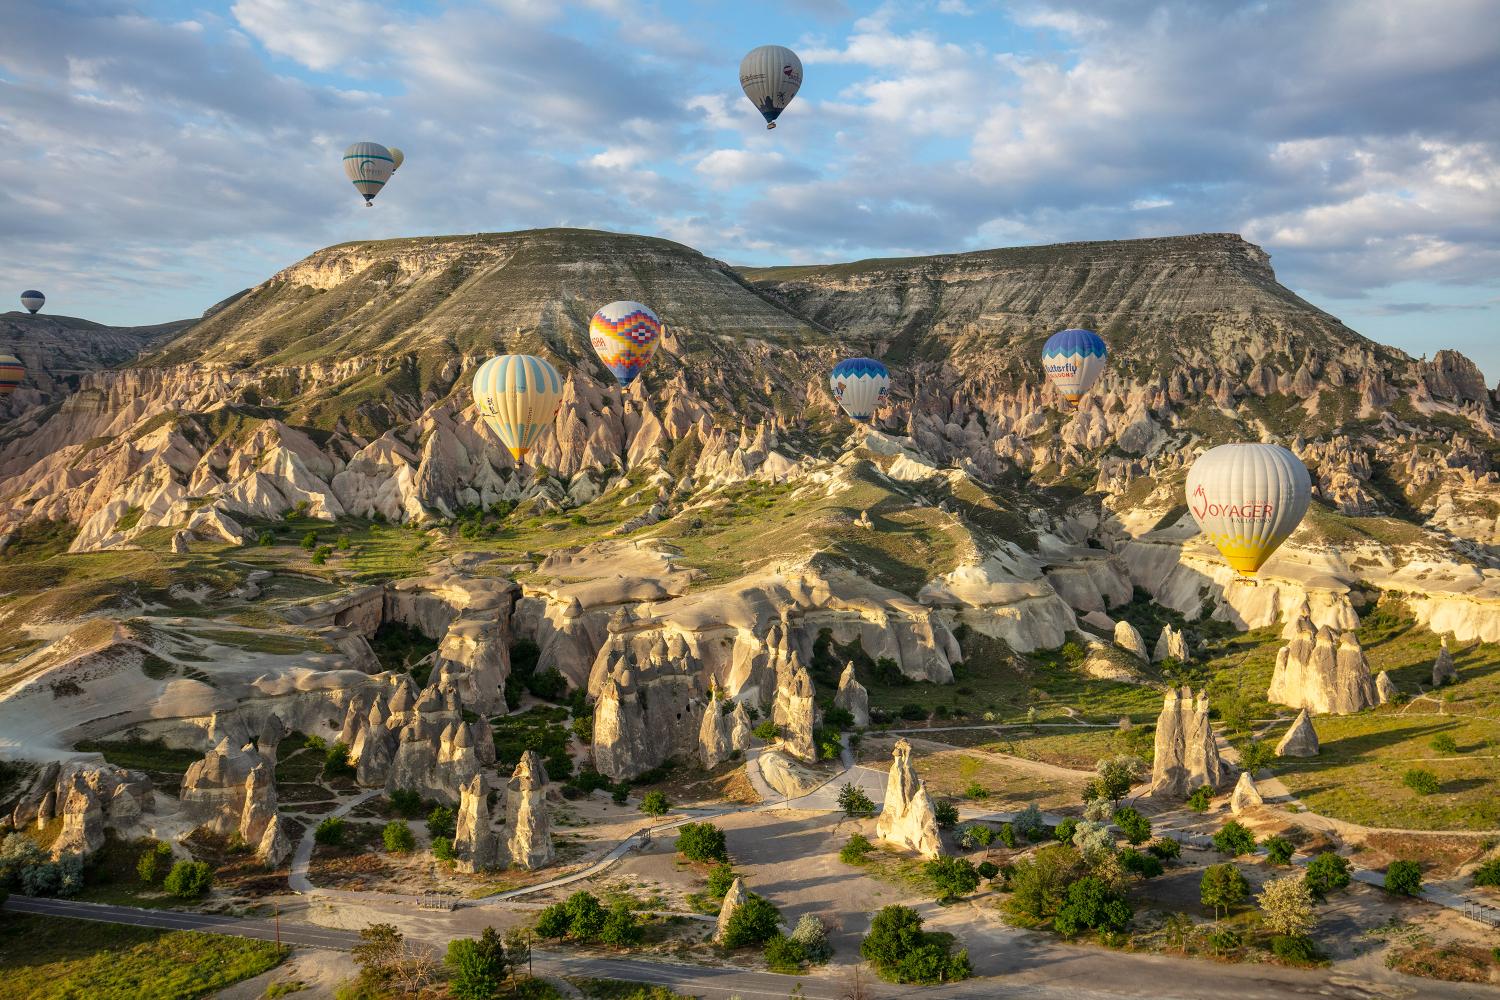 Hot air balloons floating over fairy chimneys.